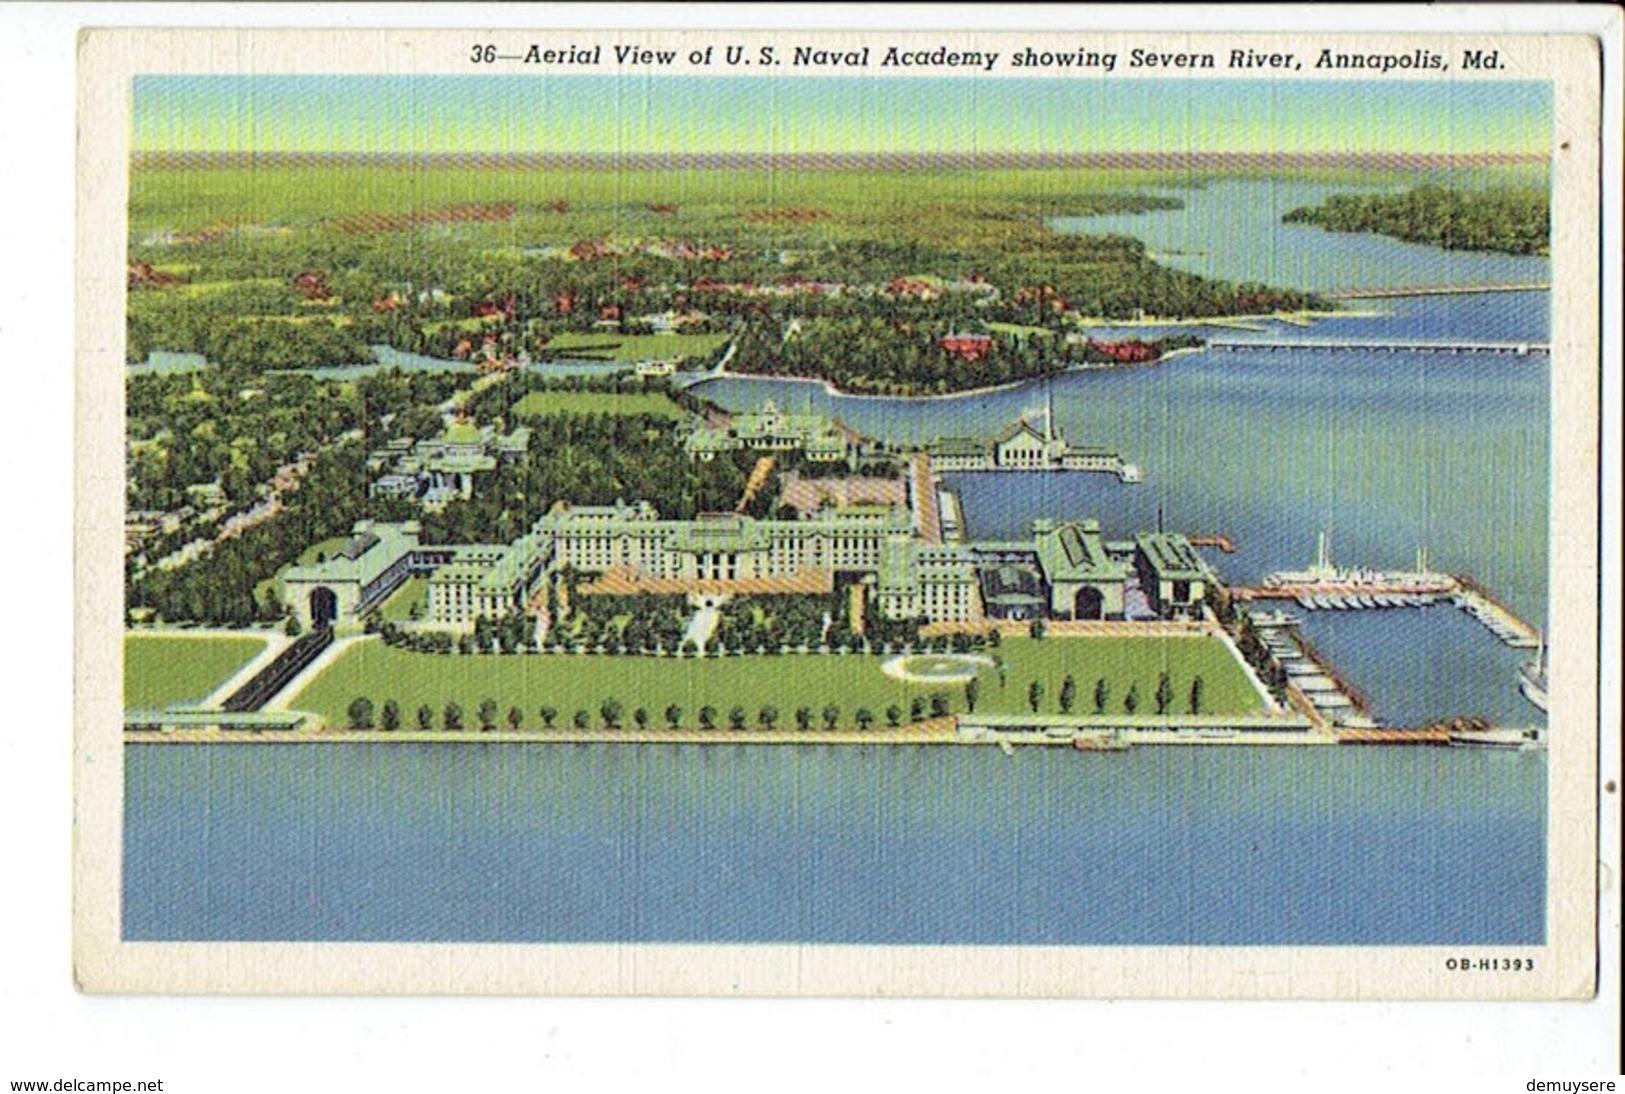 38180 AERIAL VIEW OF U.S. NAVAL ACANEMY SCHWING SEVERN RIVER ANNAPOLIS MD - Annapolis – Naval Academy